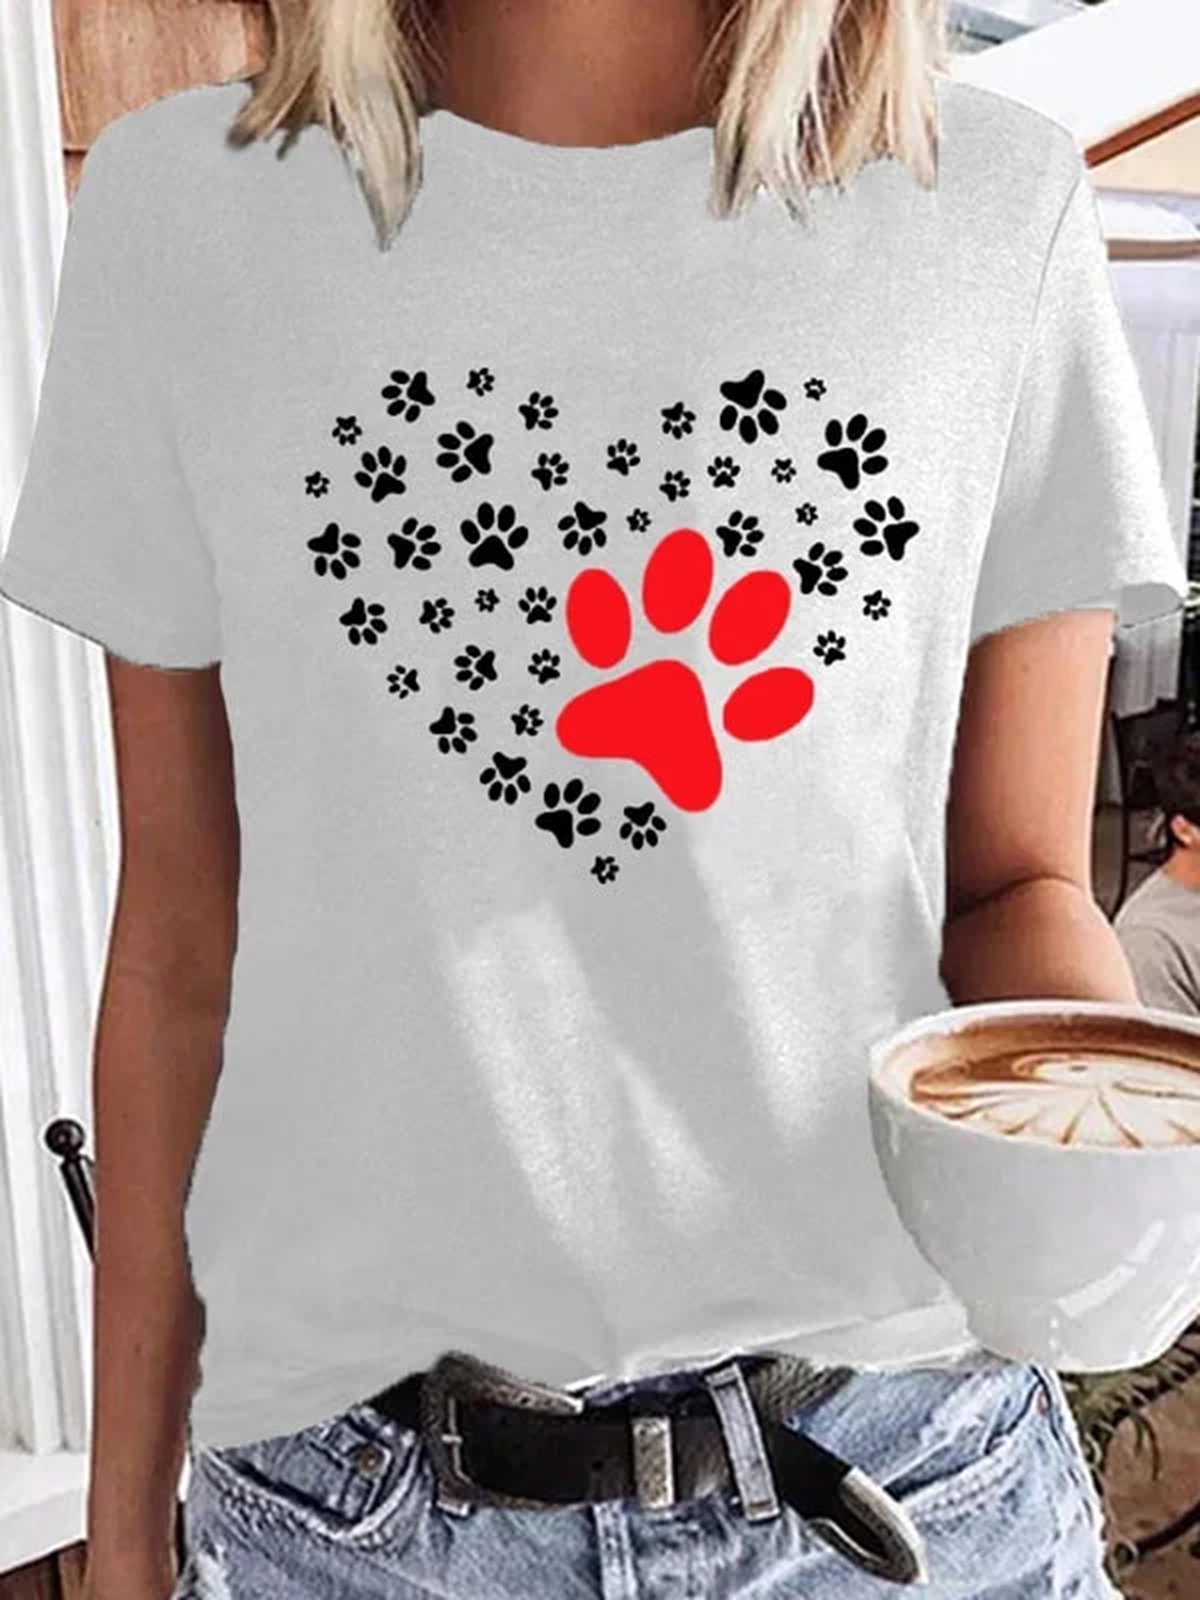 Women's Tee T-Shirt Heart Print Casual Crew Neck Top Valentine's Day Gifts Black White Gray Red